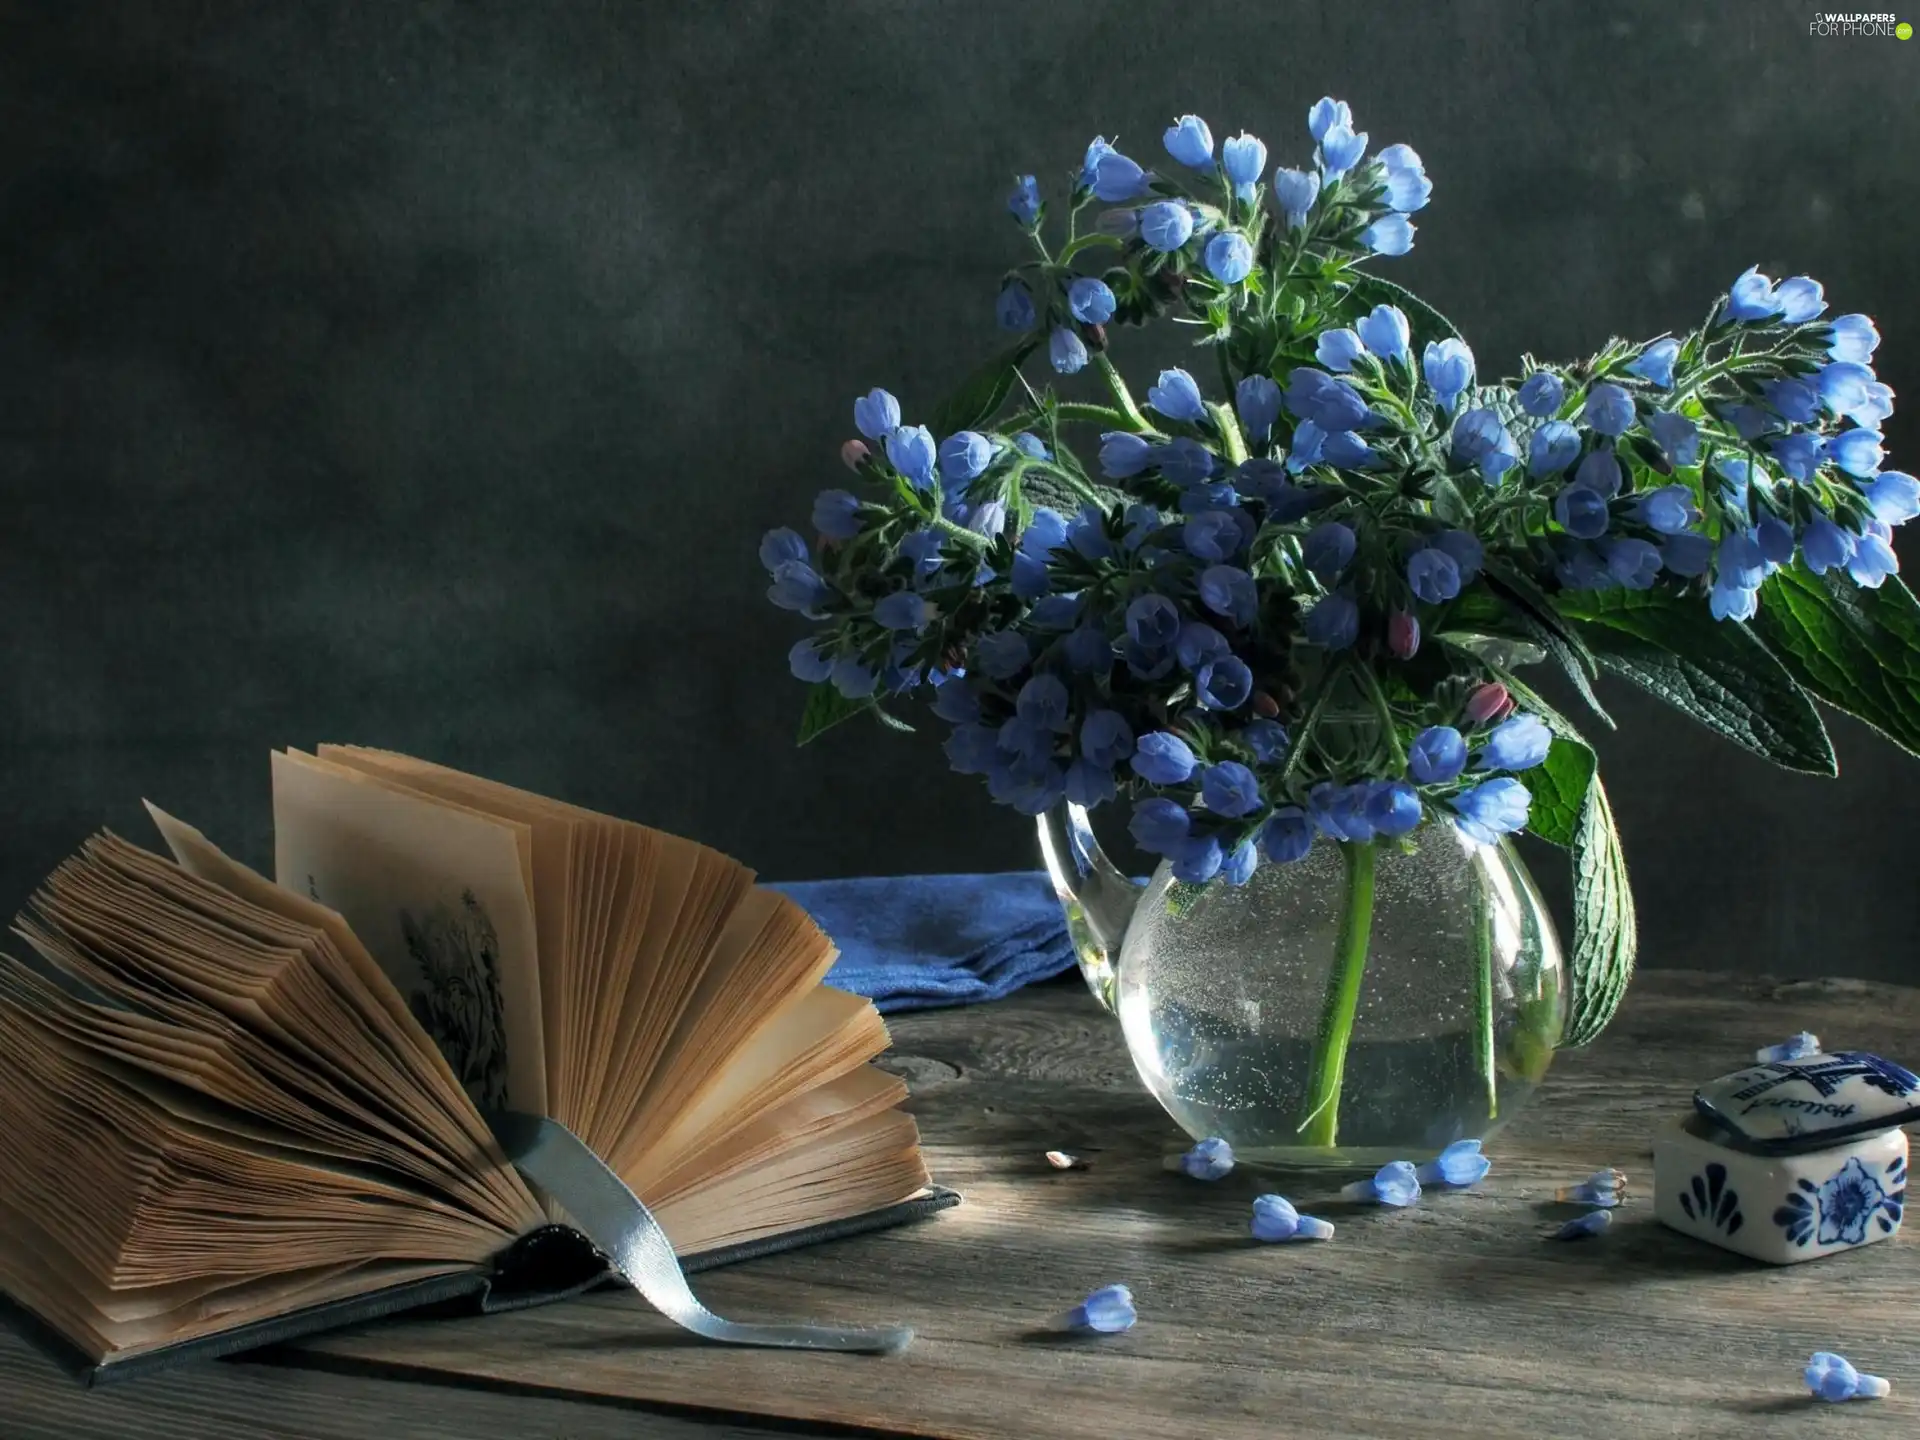 flowers, Book, small bunch, Blue, Vase